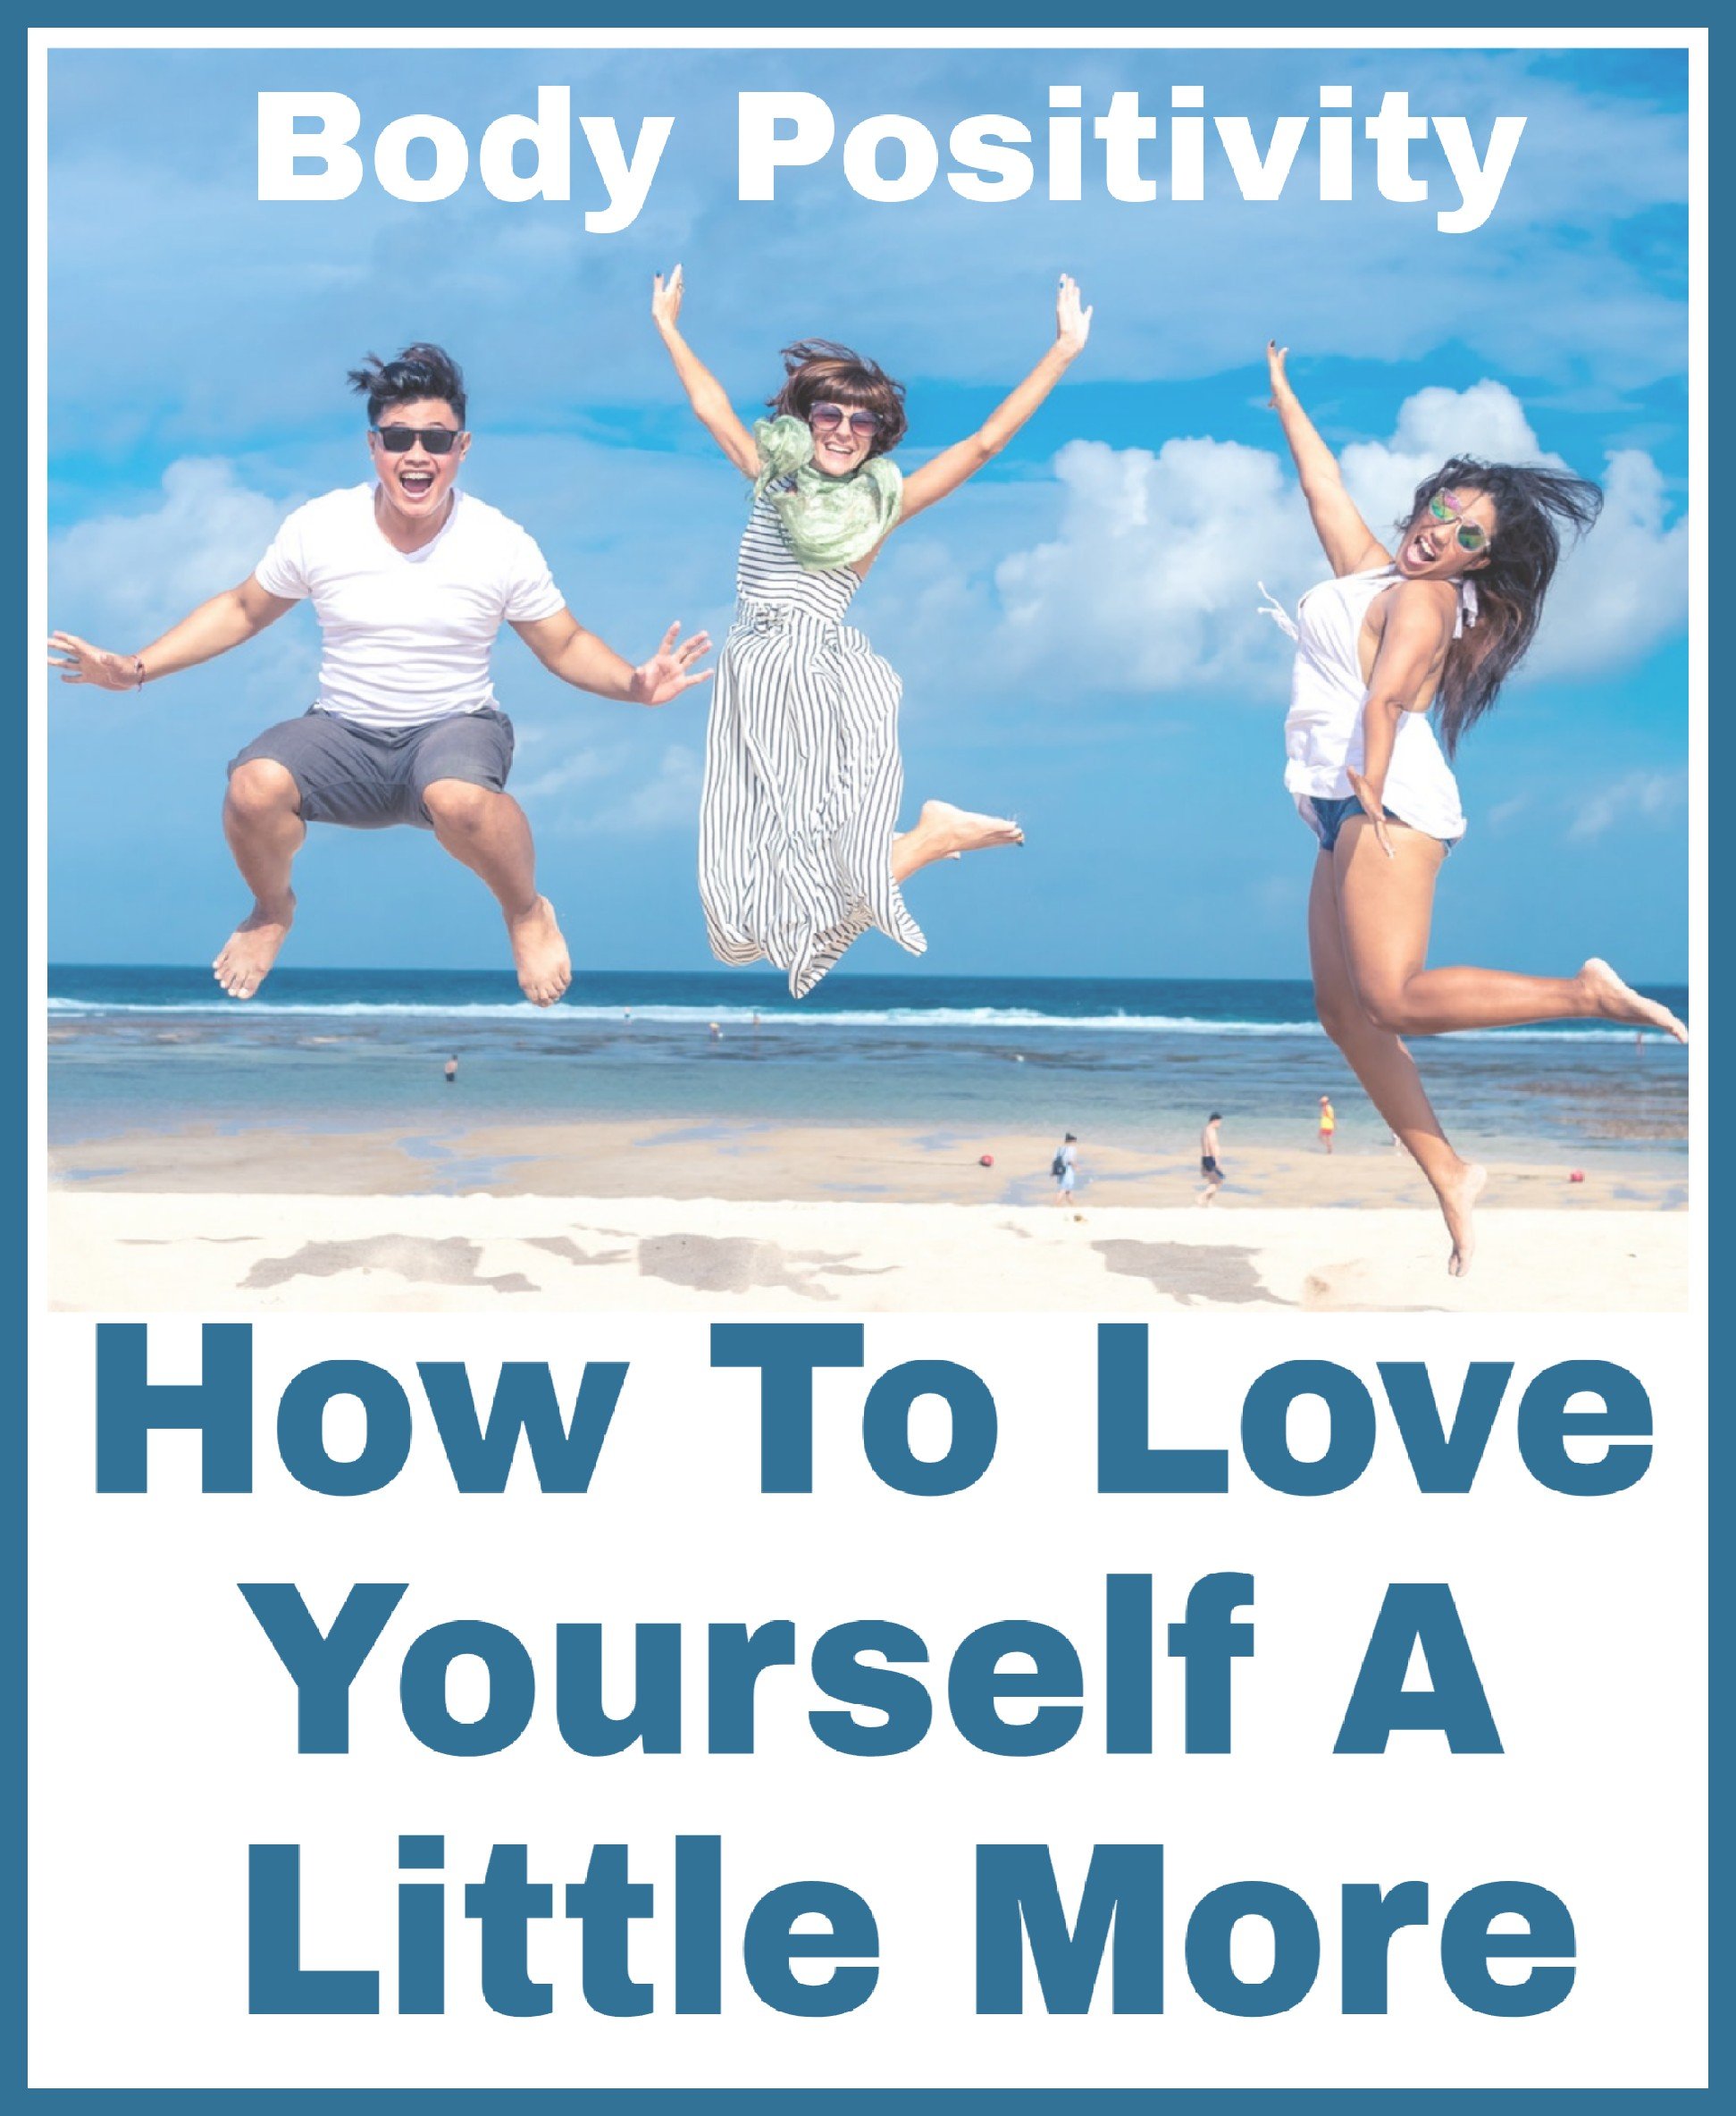 Title Body Positivity: How To Love Yourself A Little More with image of 3 people jumping for joy on a beach